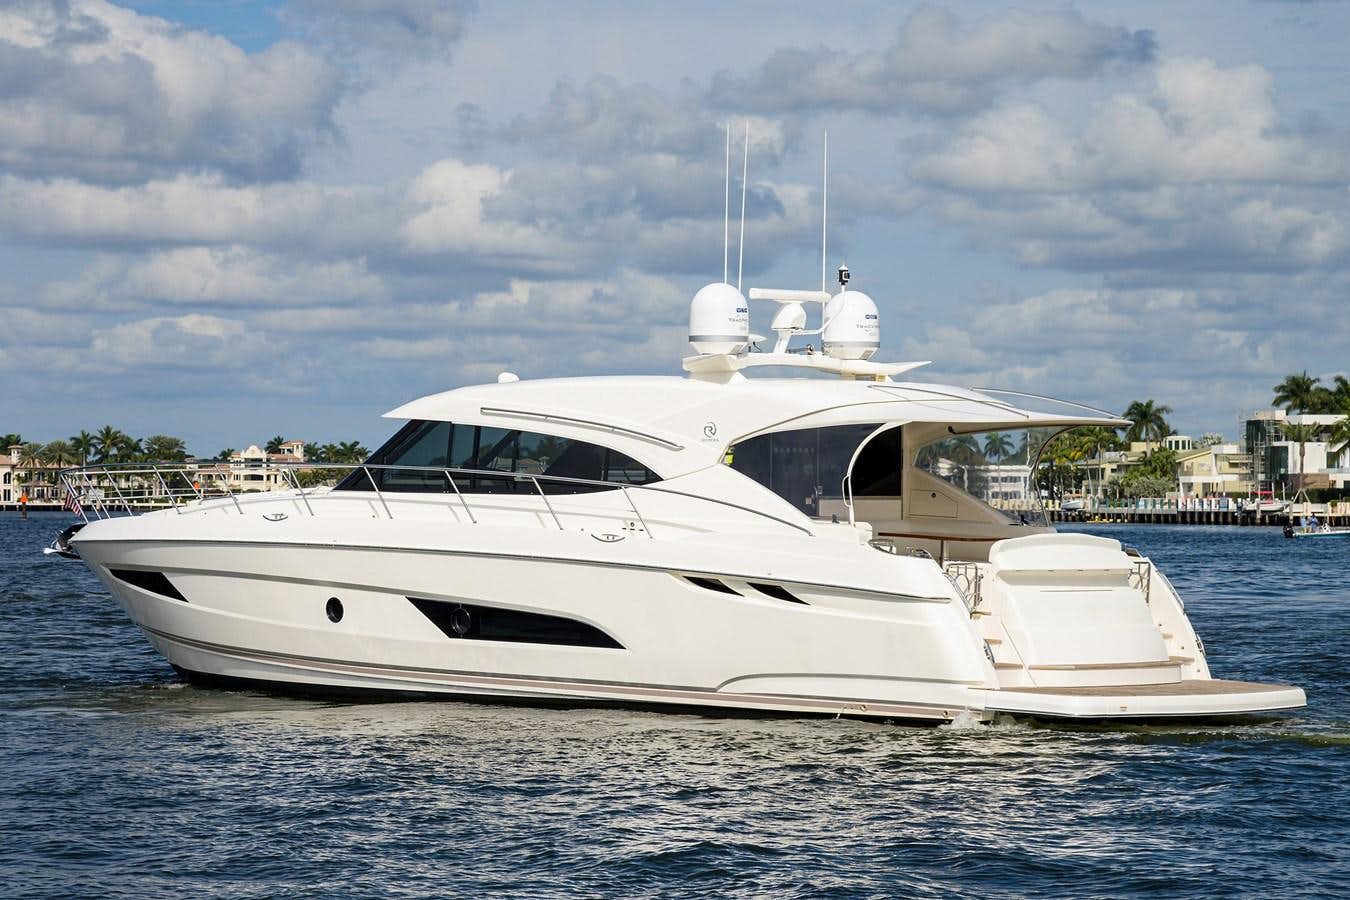 B-juled
Yacht for Sale